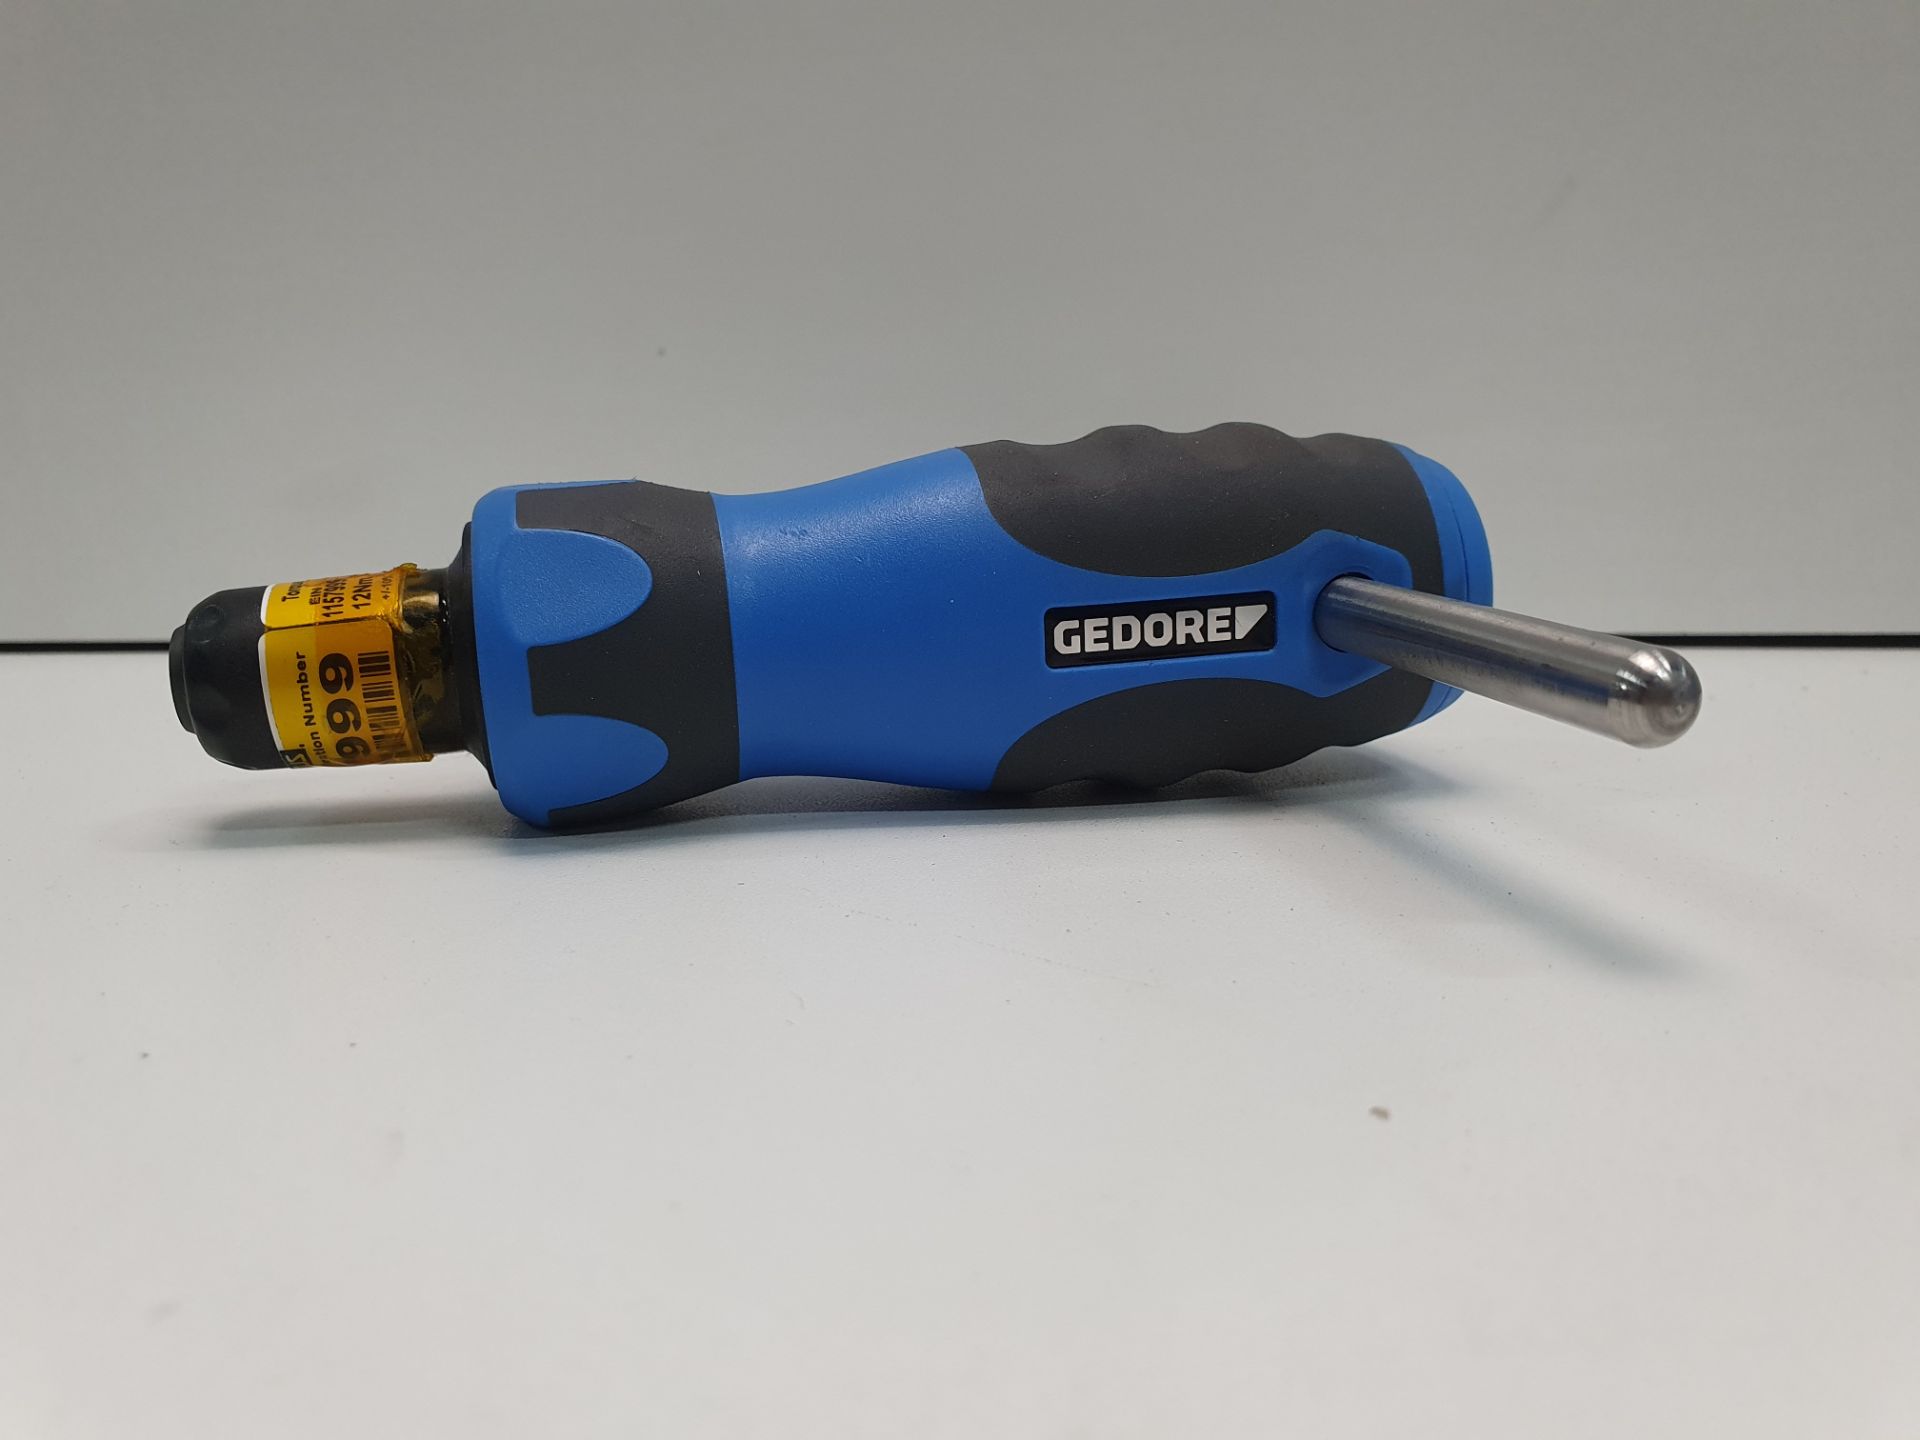 Gedore 1/4 in Hex Pre-Settable Torque Screwdriver, 2.5 ? 13.5Nm With Bar